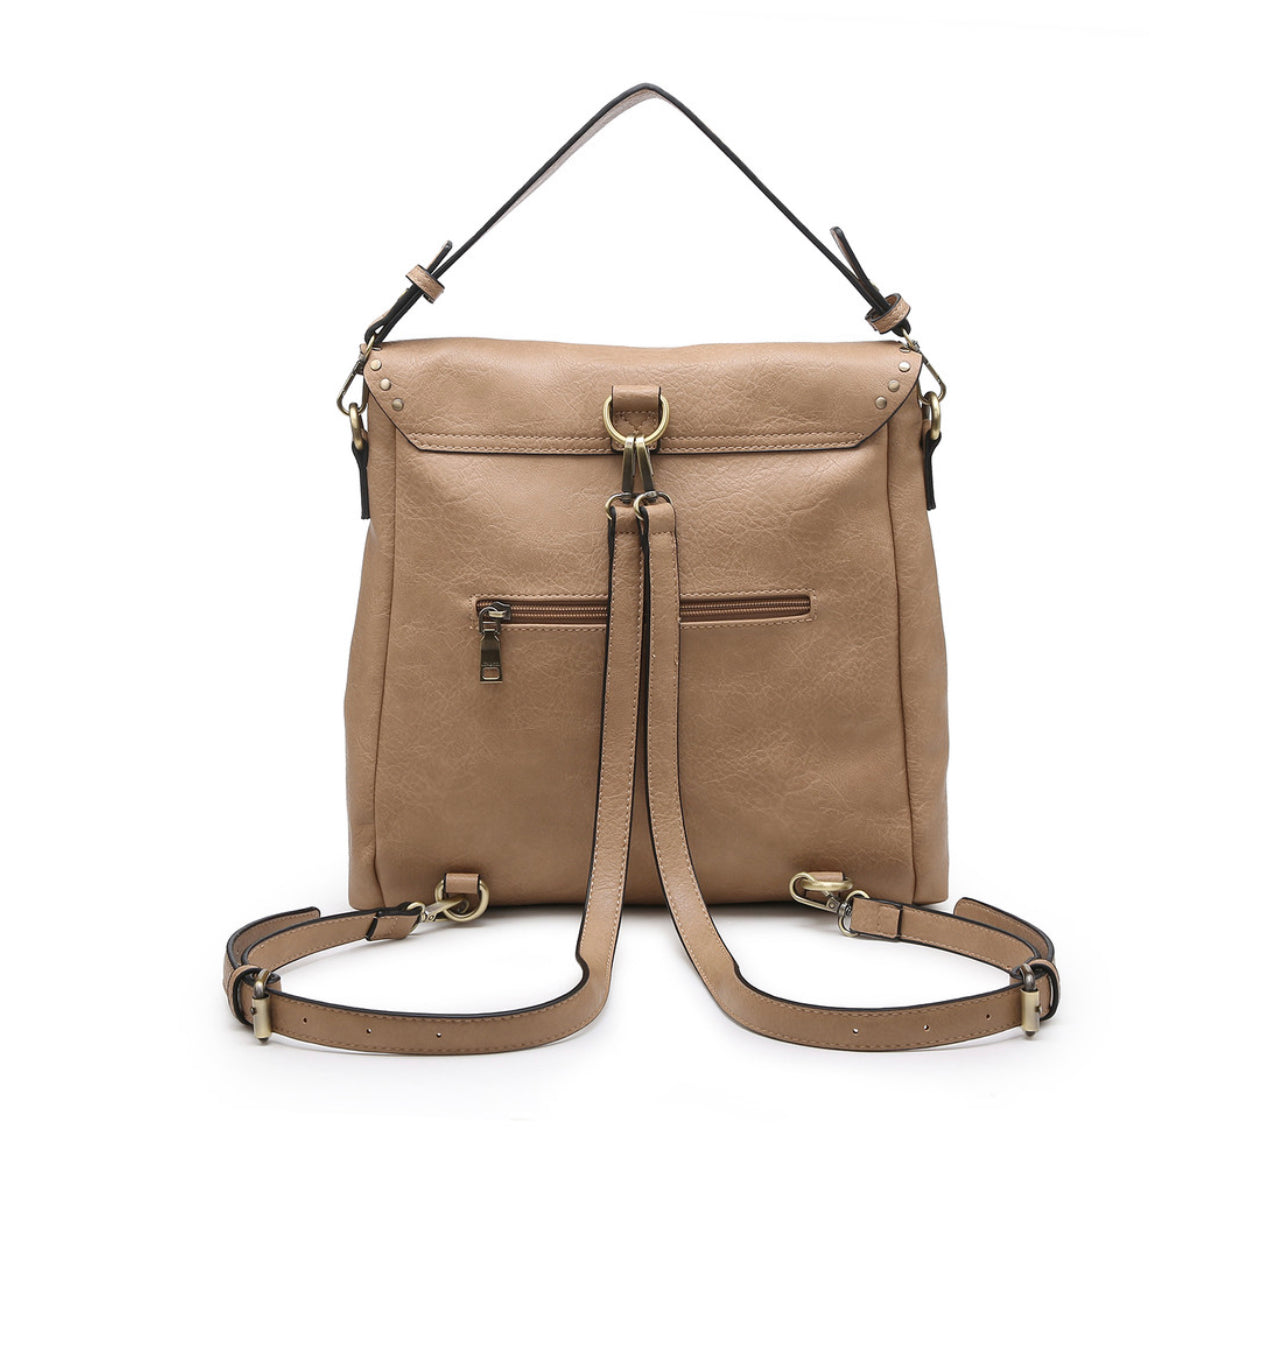 India Convertible Backpack Purse